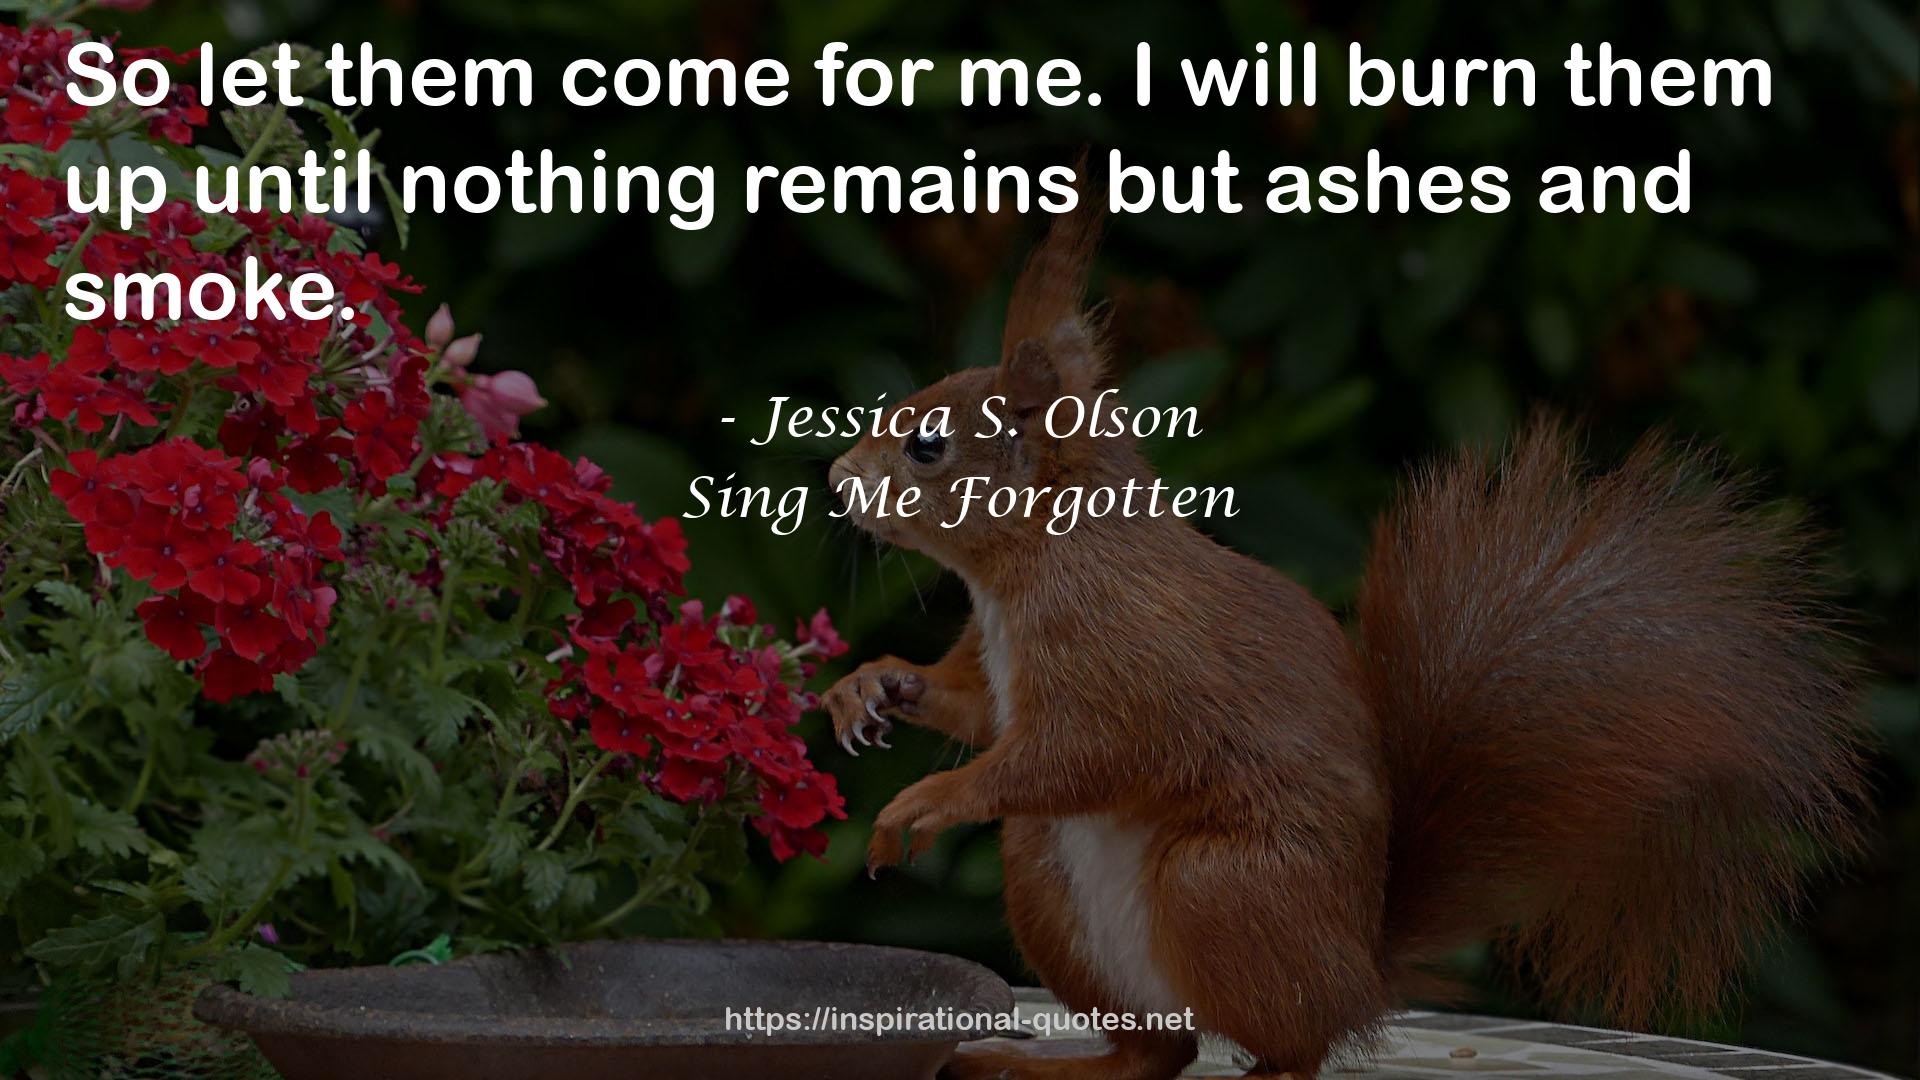 Sing Me Forgotten QUOTES